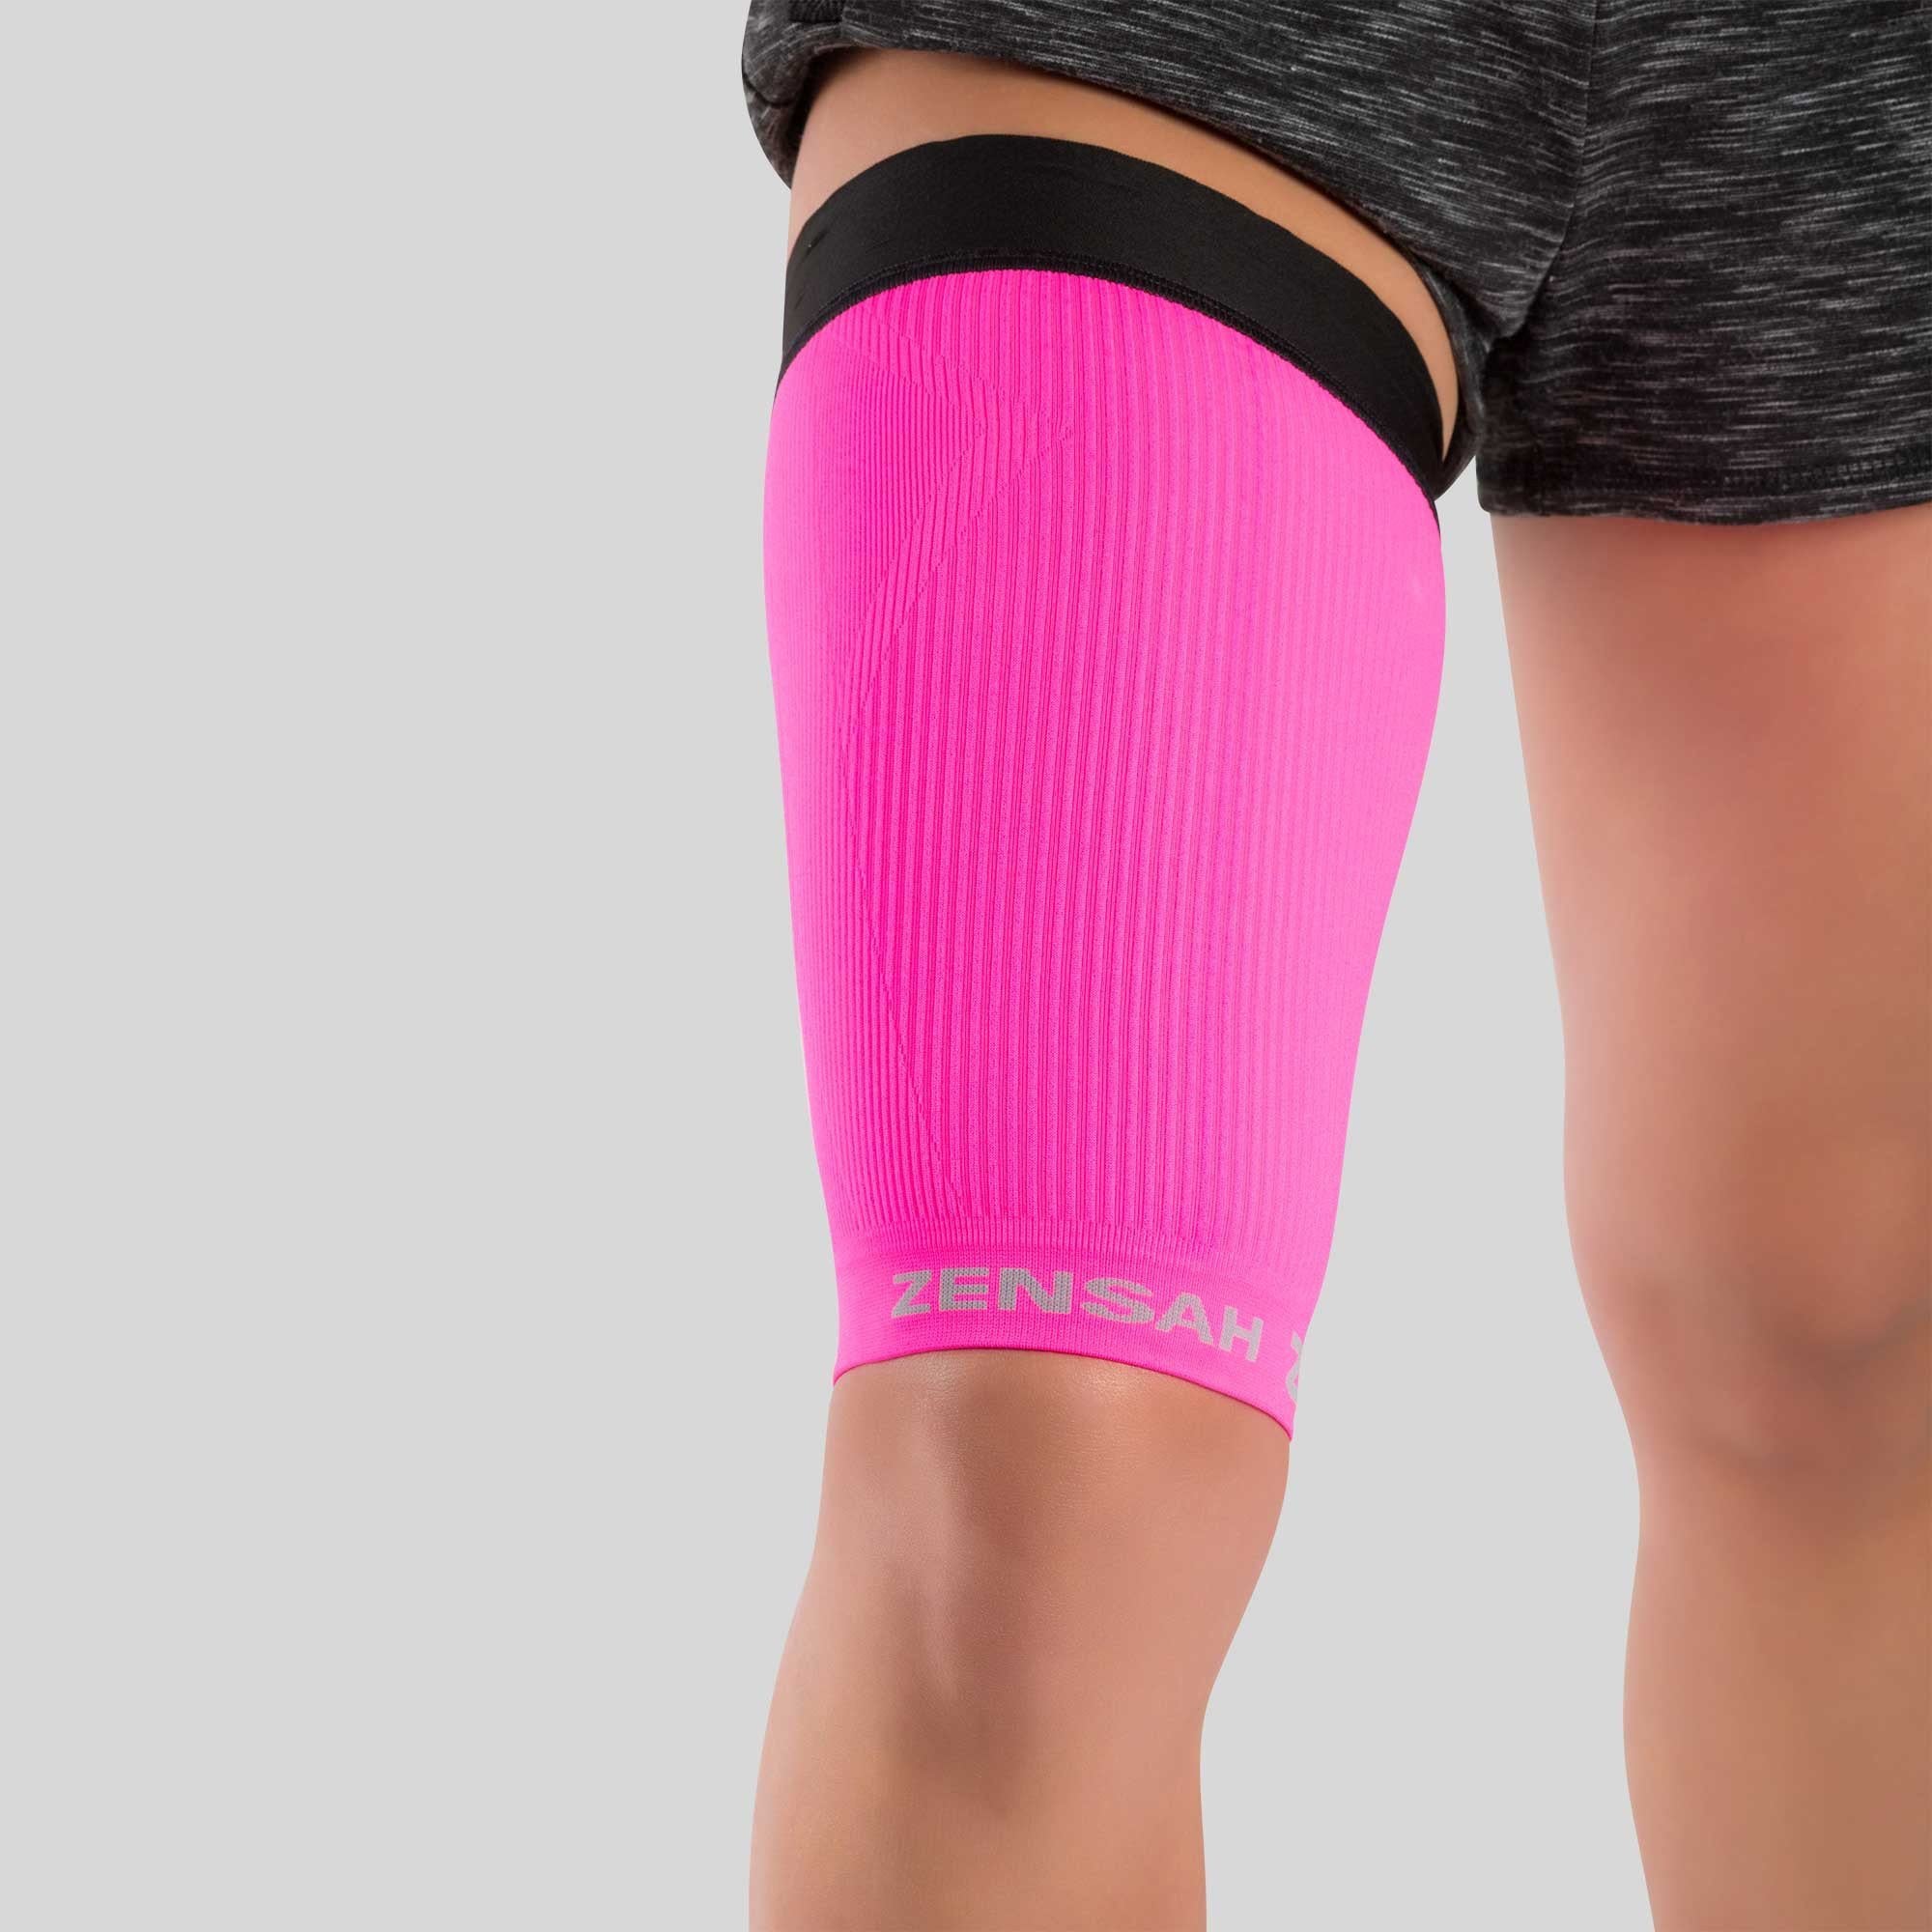 ThermaTech Thigh Compression Sleeve